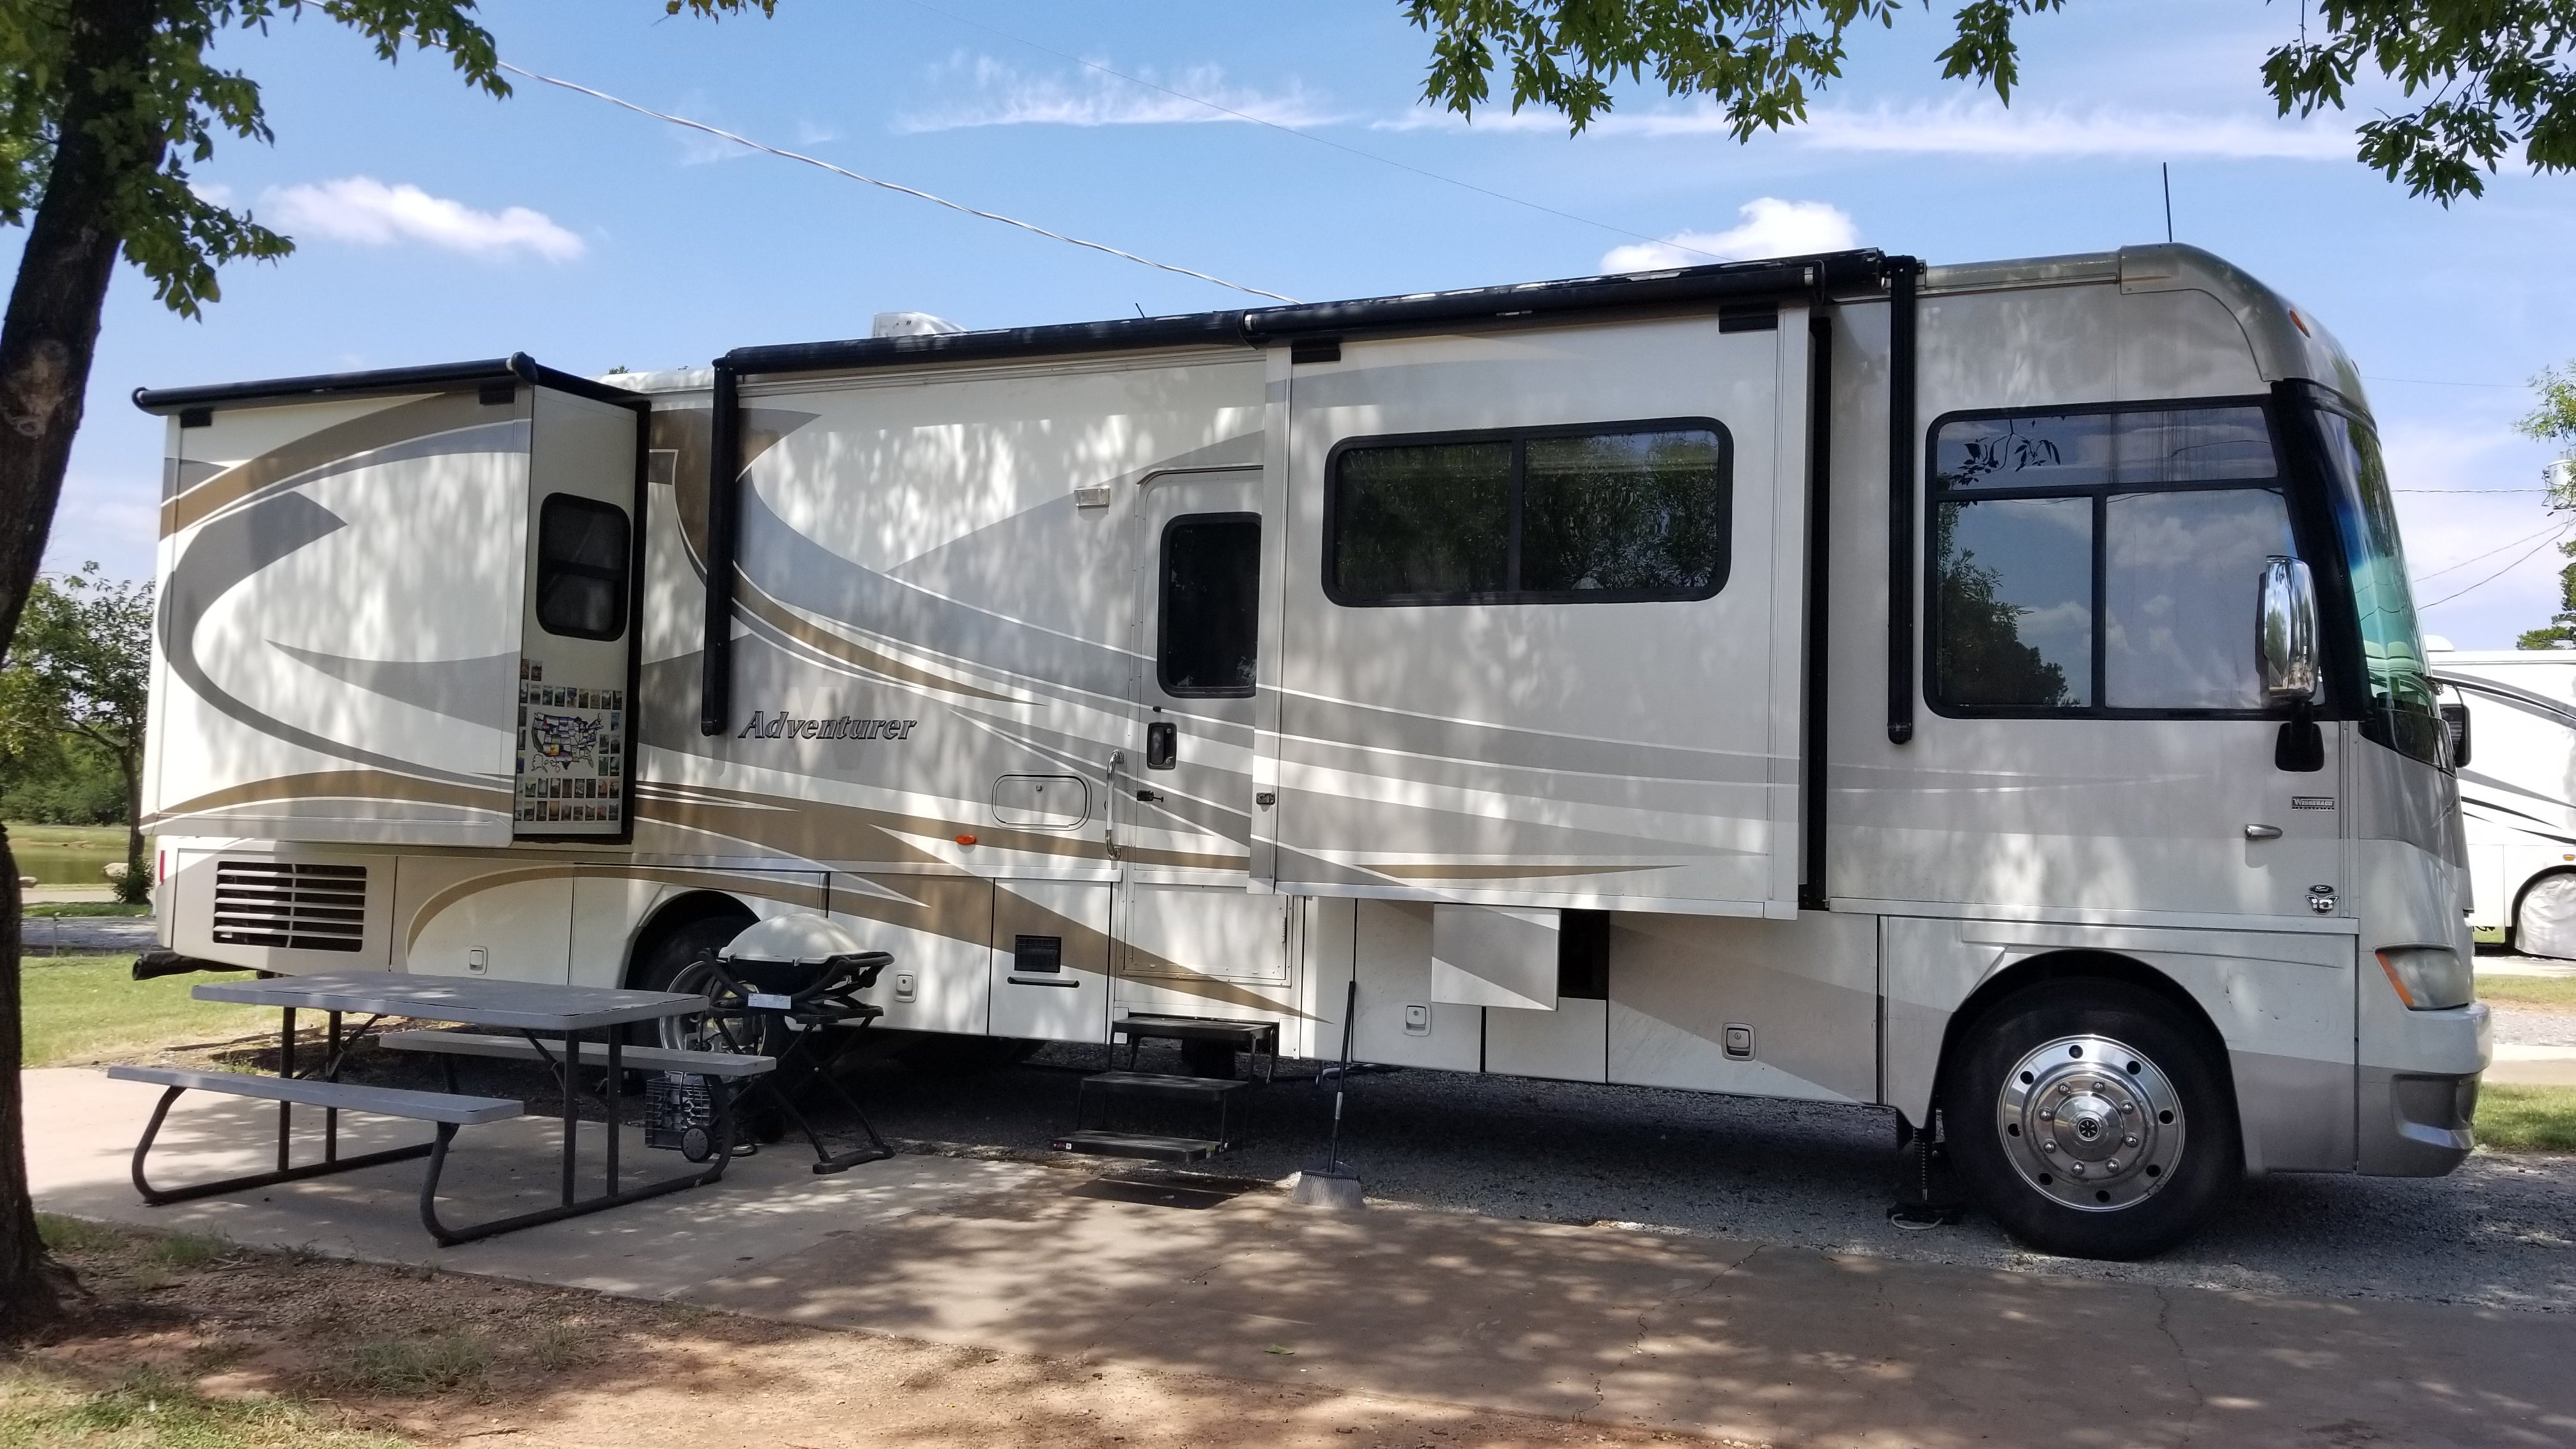 Camper submitted image from Wichita Falls RV Park - 5